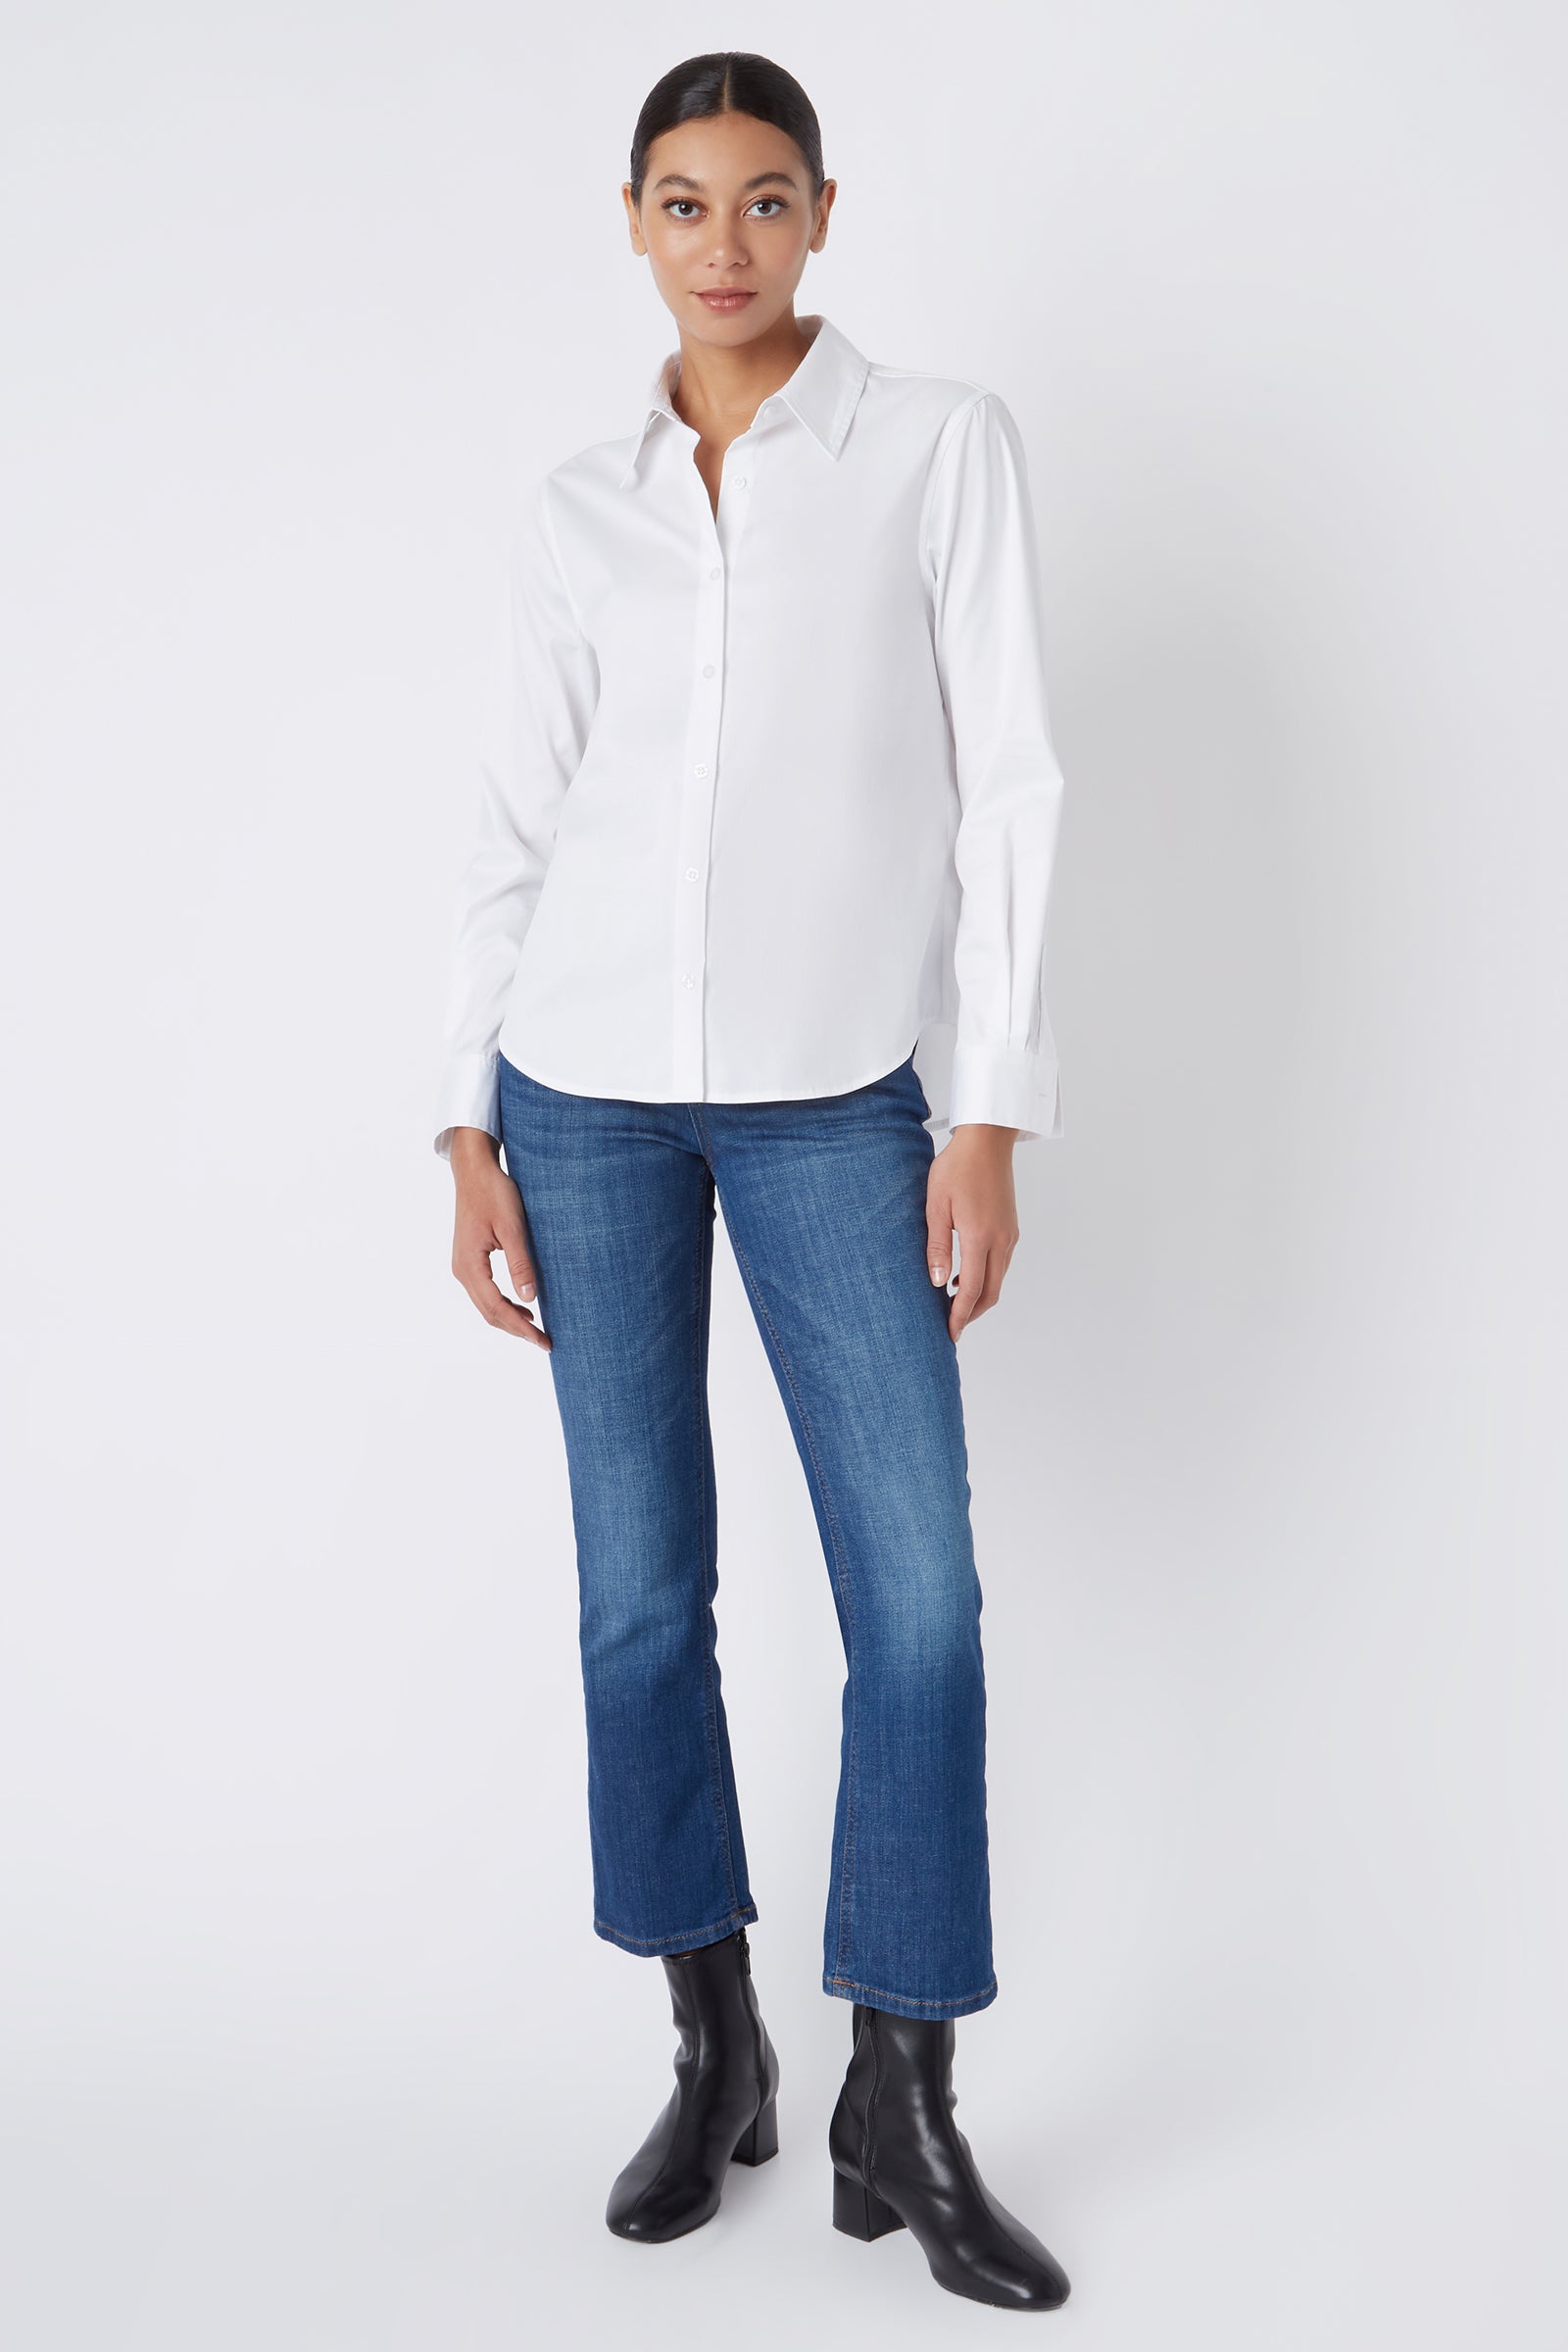 Shop All Womens Tailored Shirts – Page 3 – KAL RIEMAN